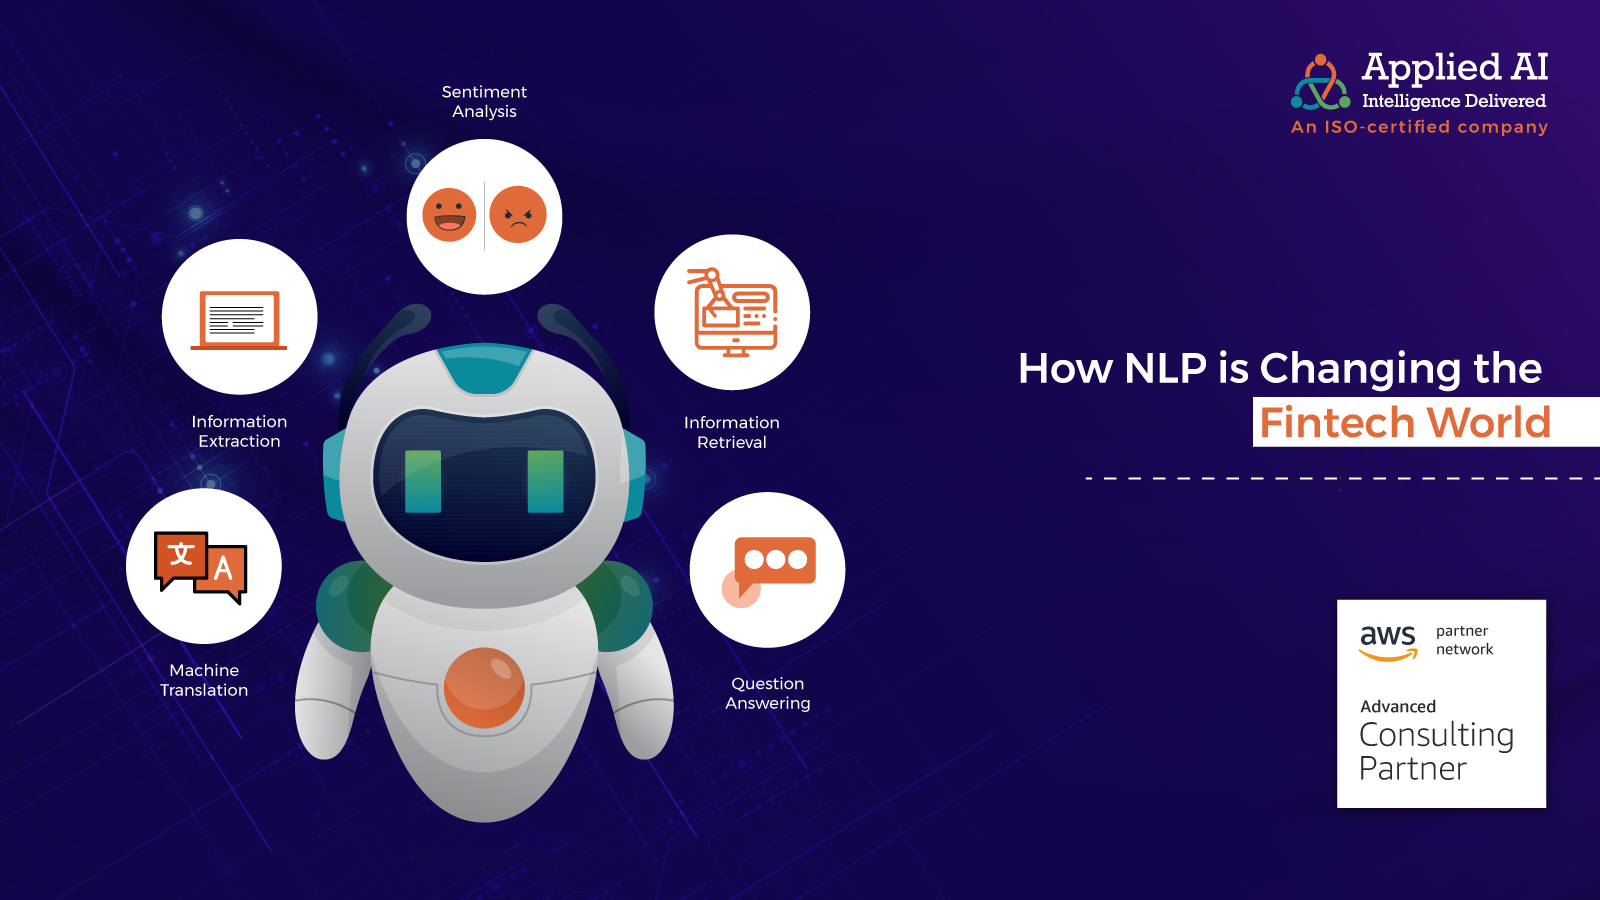 How NLP is changing the Fintech world